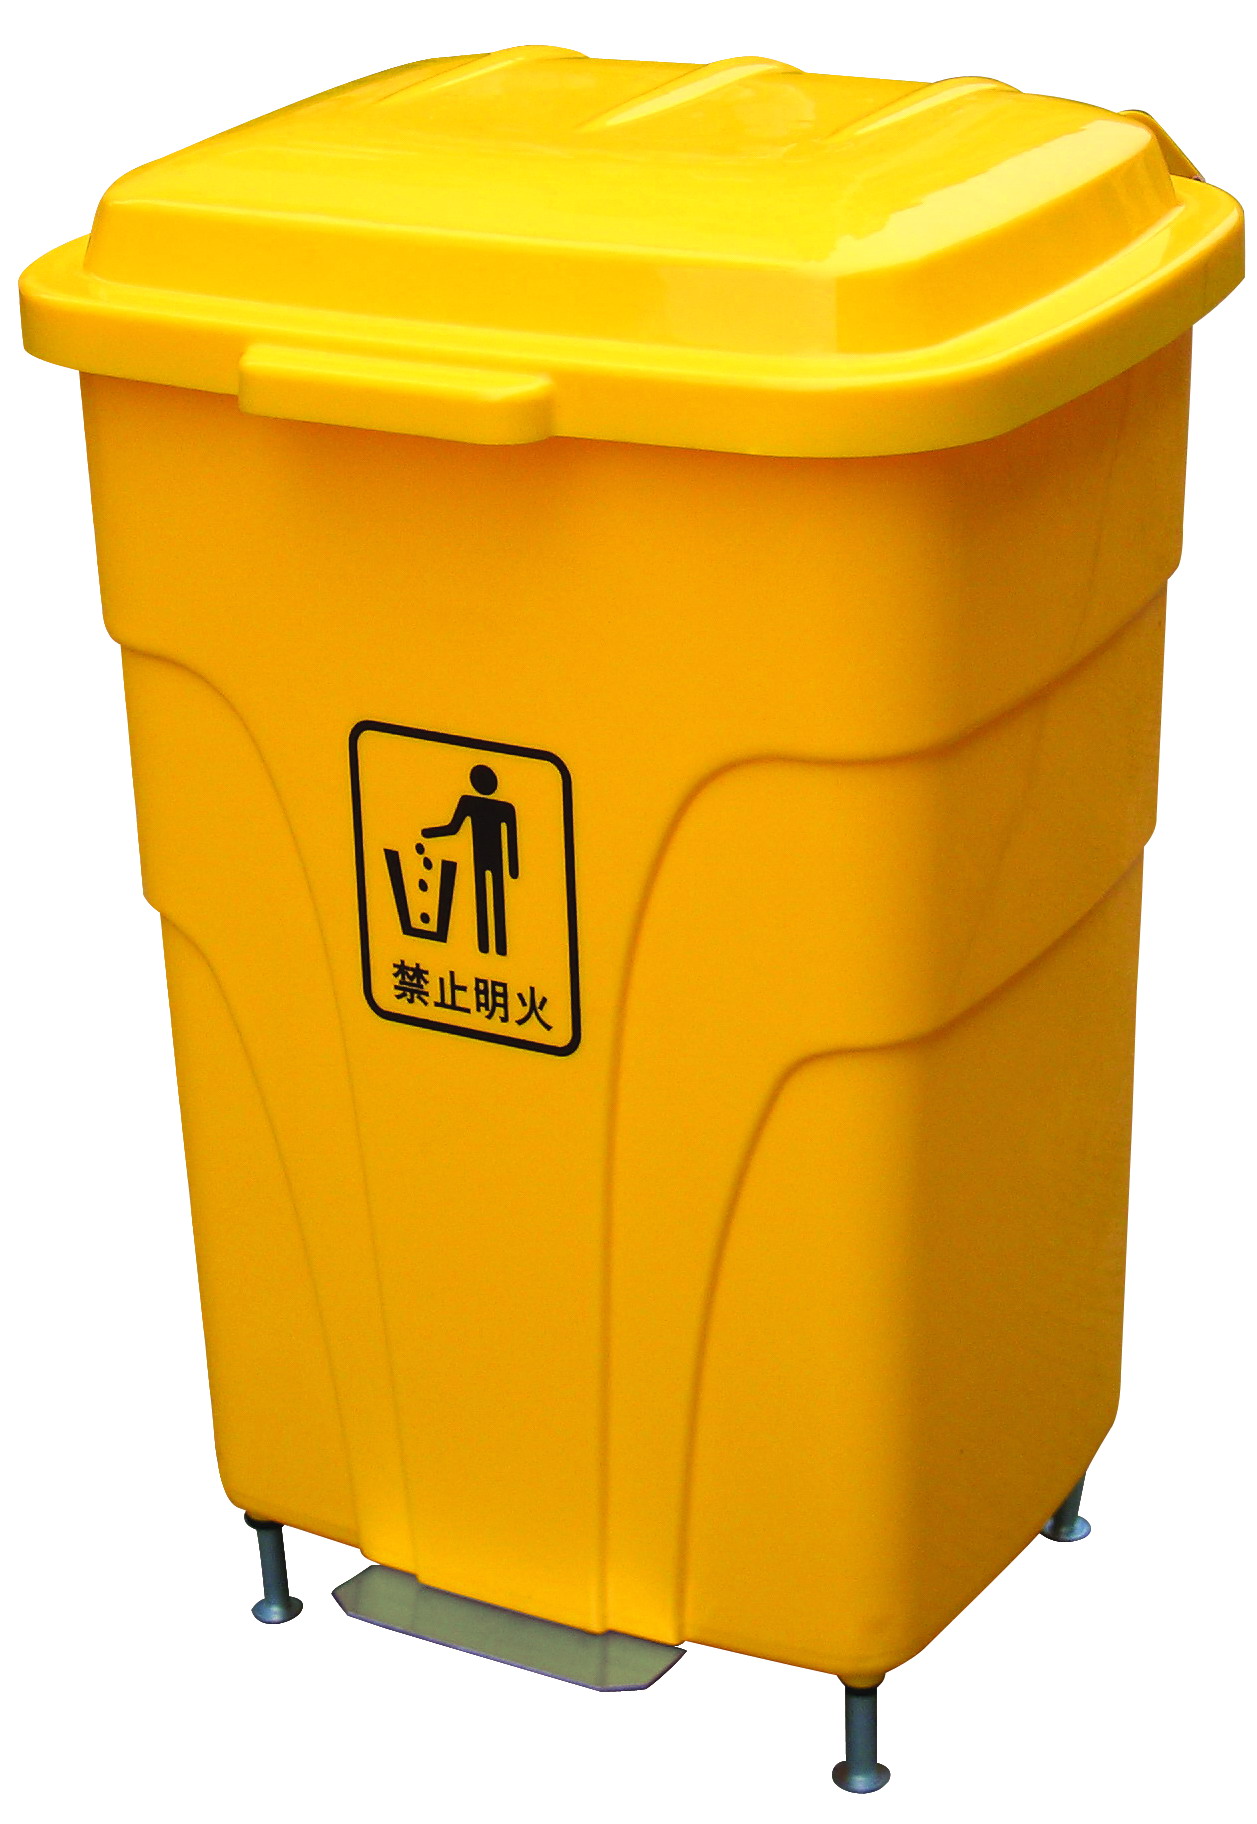 foot-control garbage can